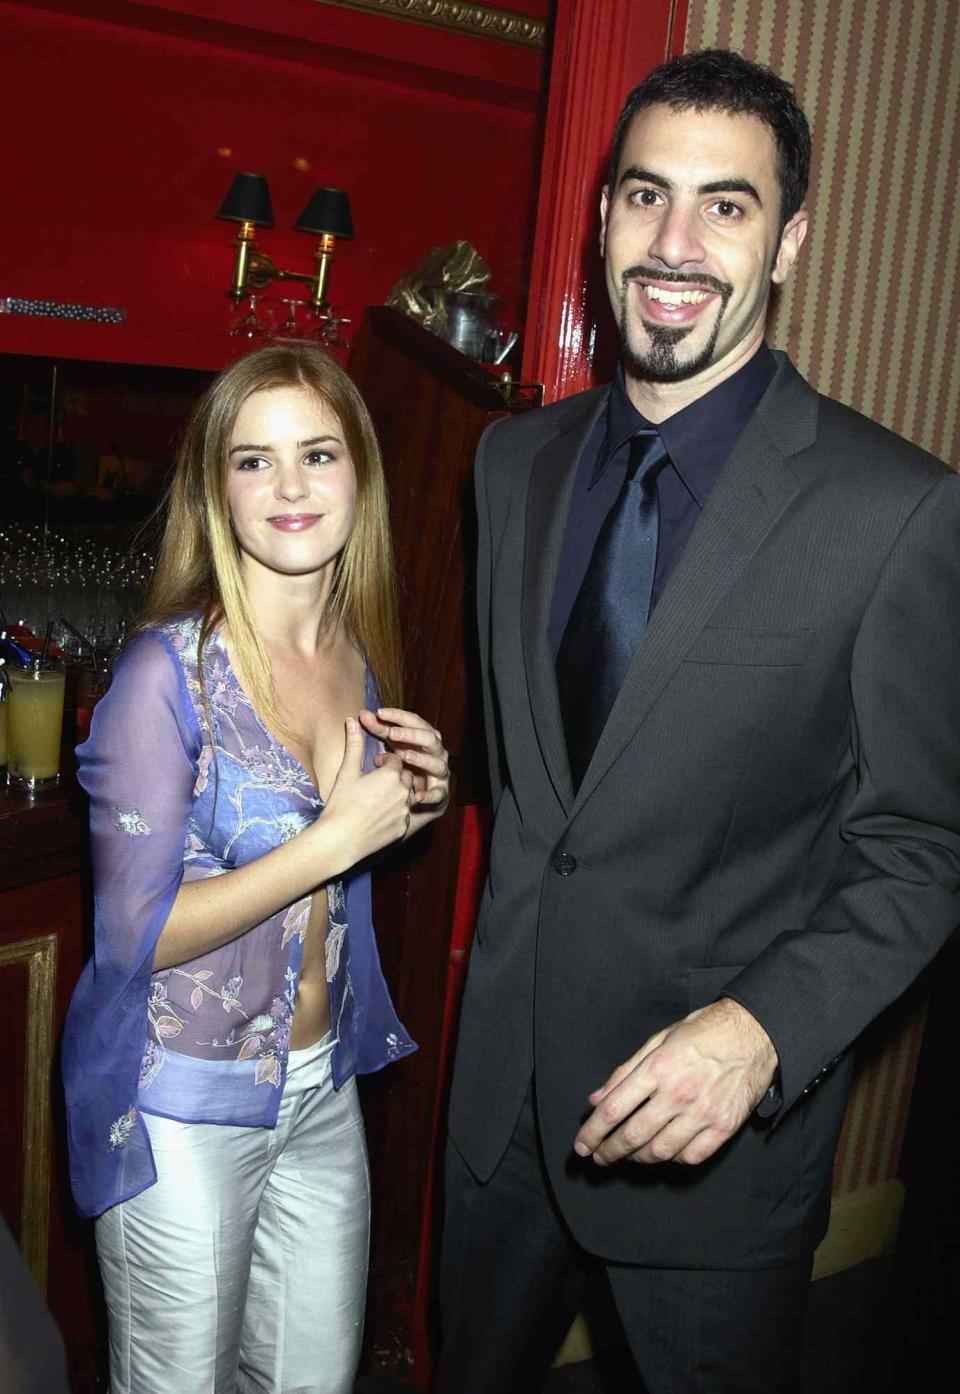 Sacha Baron Cohen aka Ali G and his girlfriend Isla Fisher during the After-Party for the Premiere of the movie 'Ali G The Movie' on March 19th, 2002 at the Mayfair Club in London